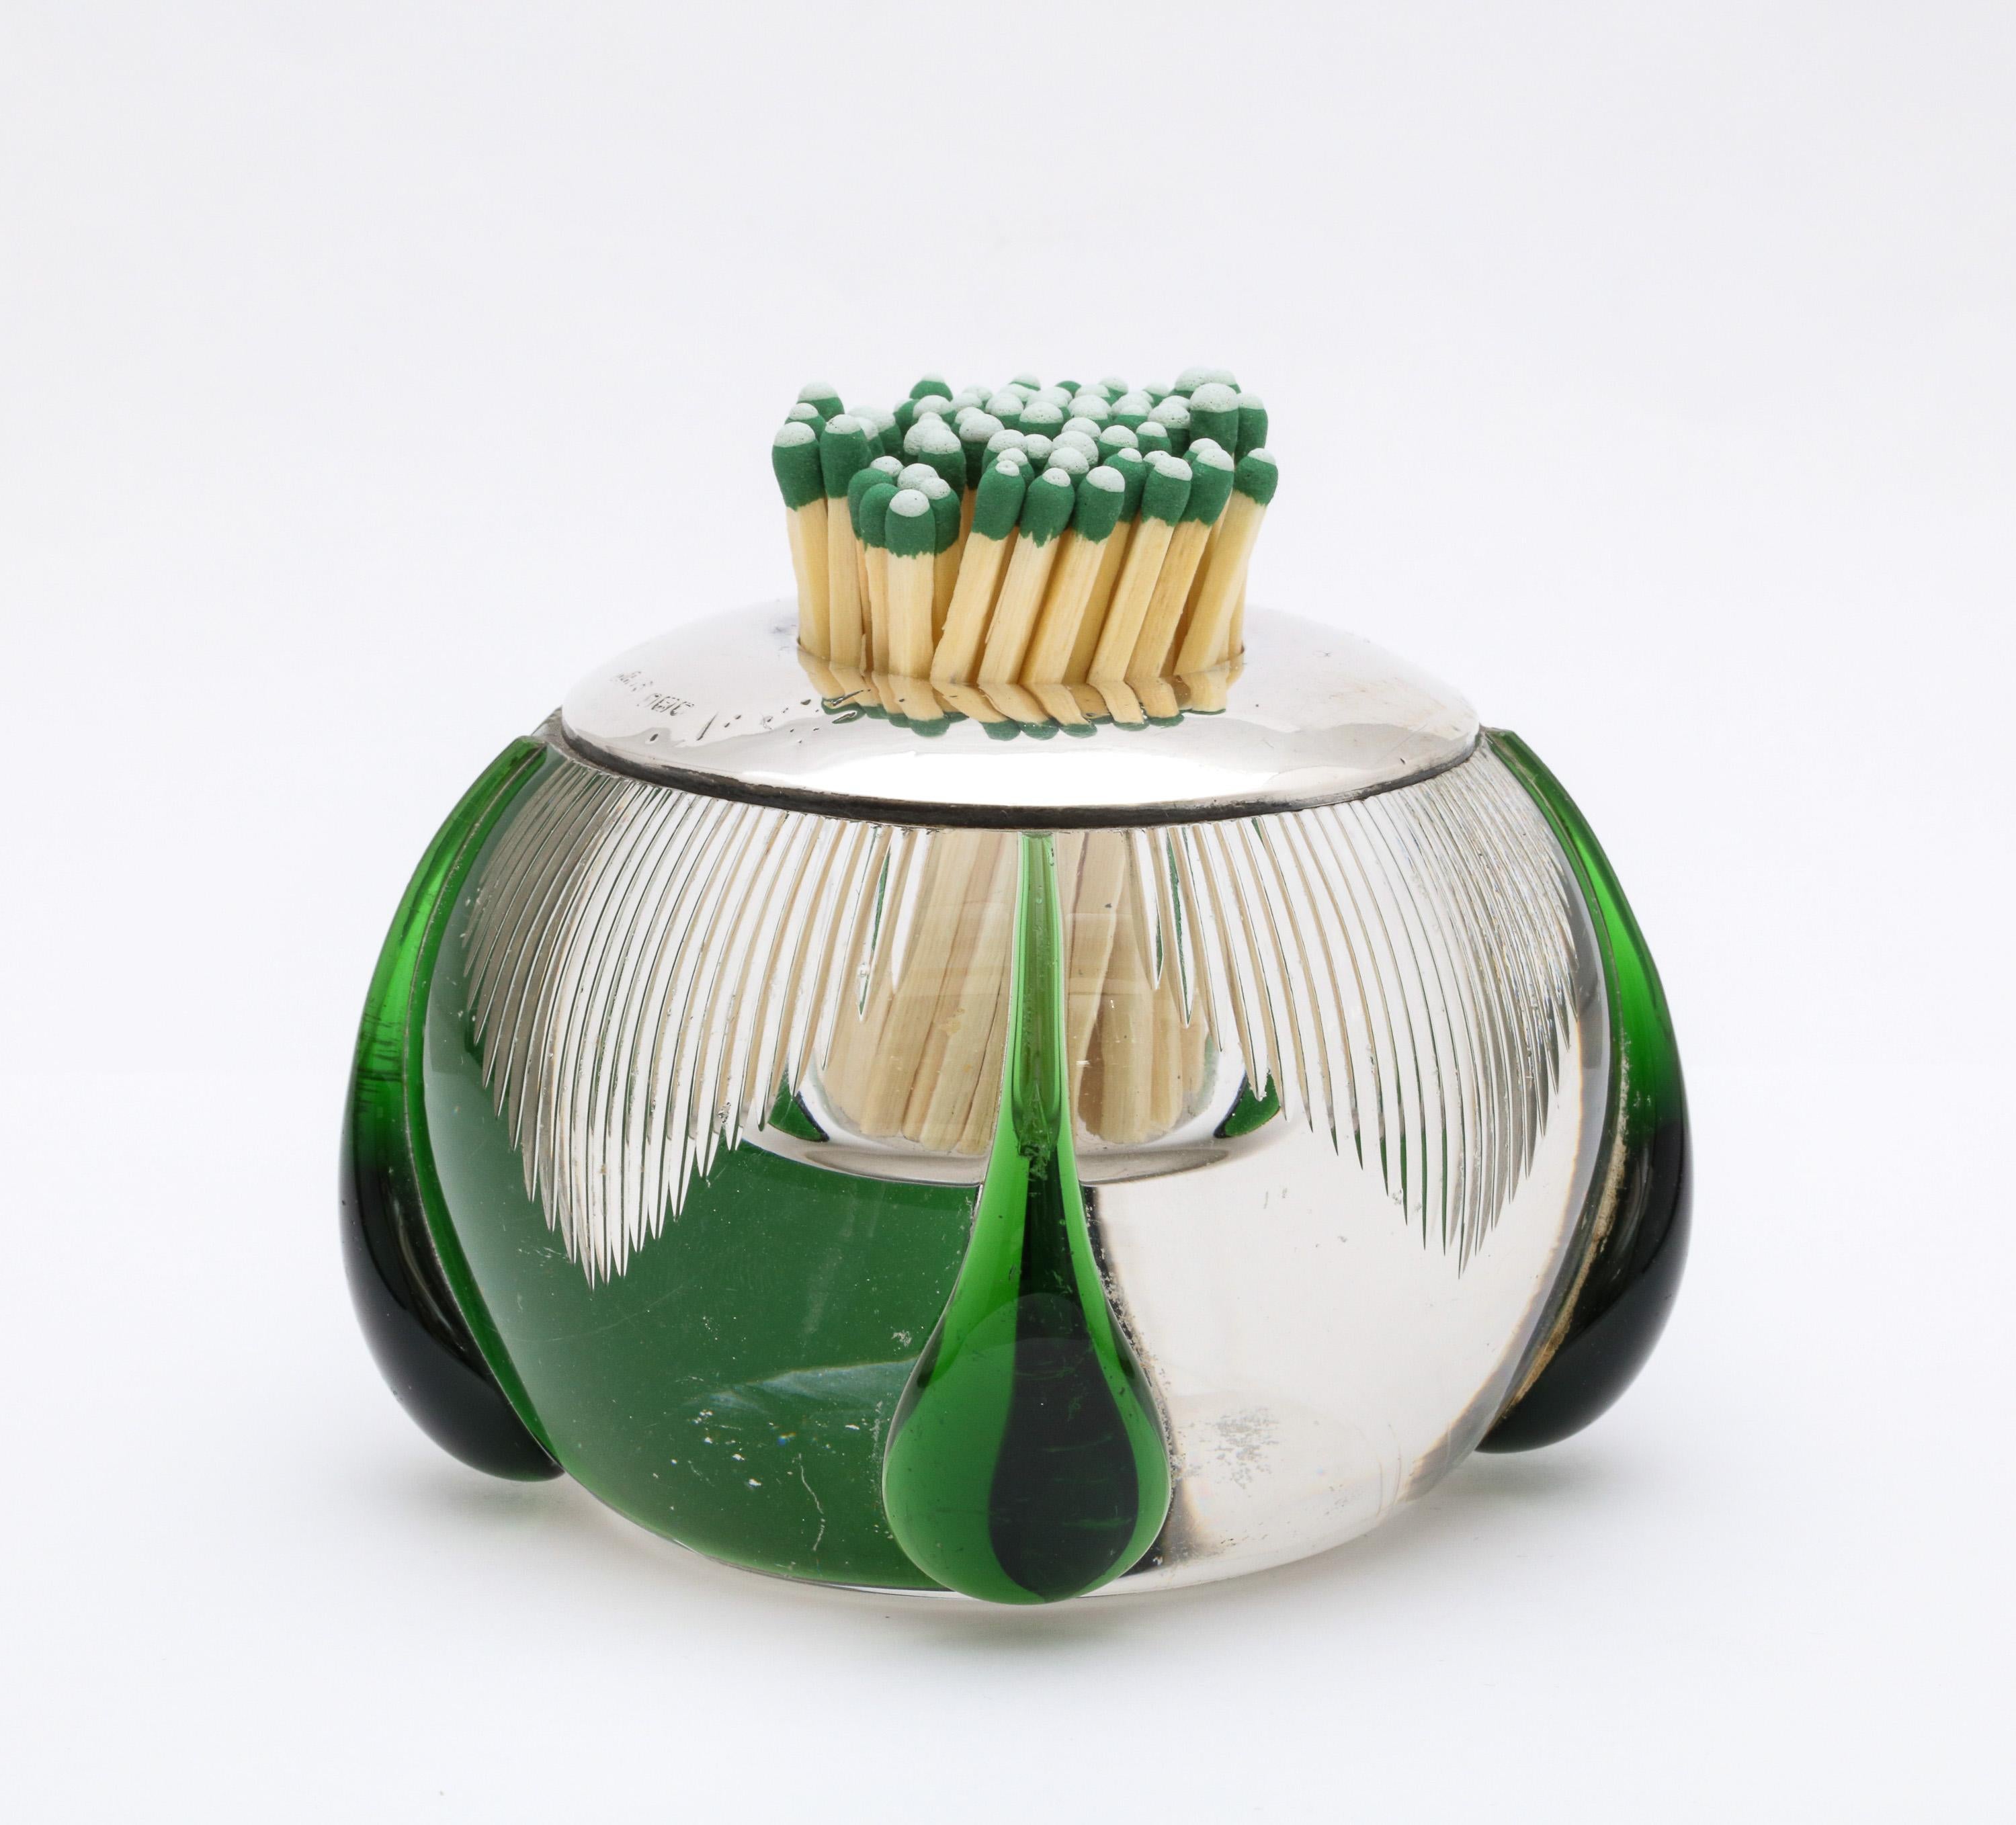 Large, unusual Art Deco sterling silver-mounted, clear, hand blown crystal match striker, having four, hand blown, dark green tear drop shaped designs blown onto the clear part of the crystal. London, 1919, Henry Hobbs and Sons - makers. The matches